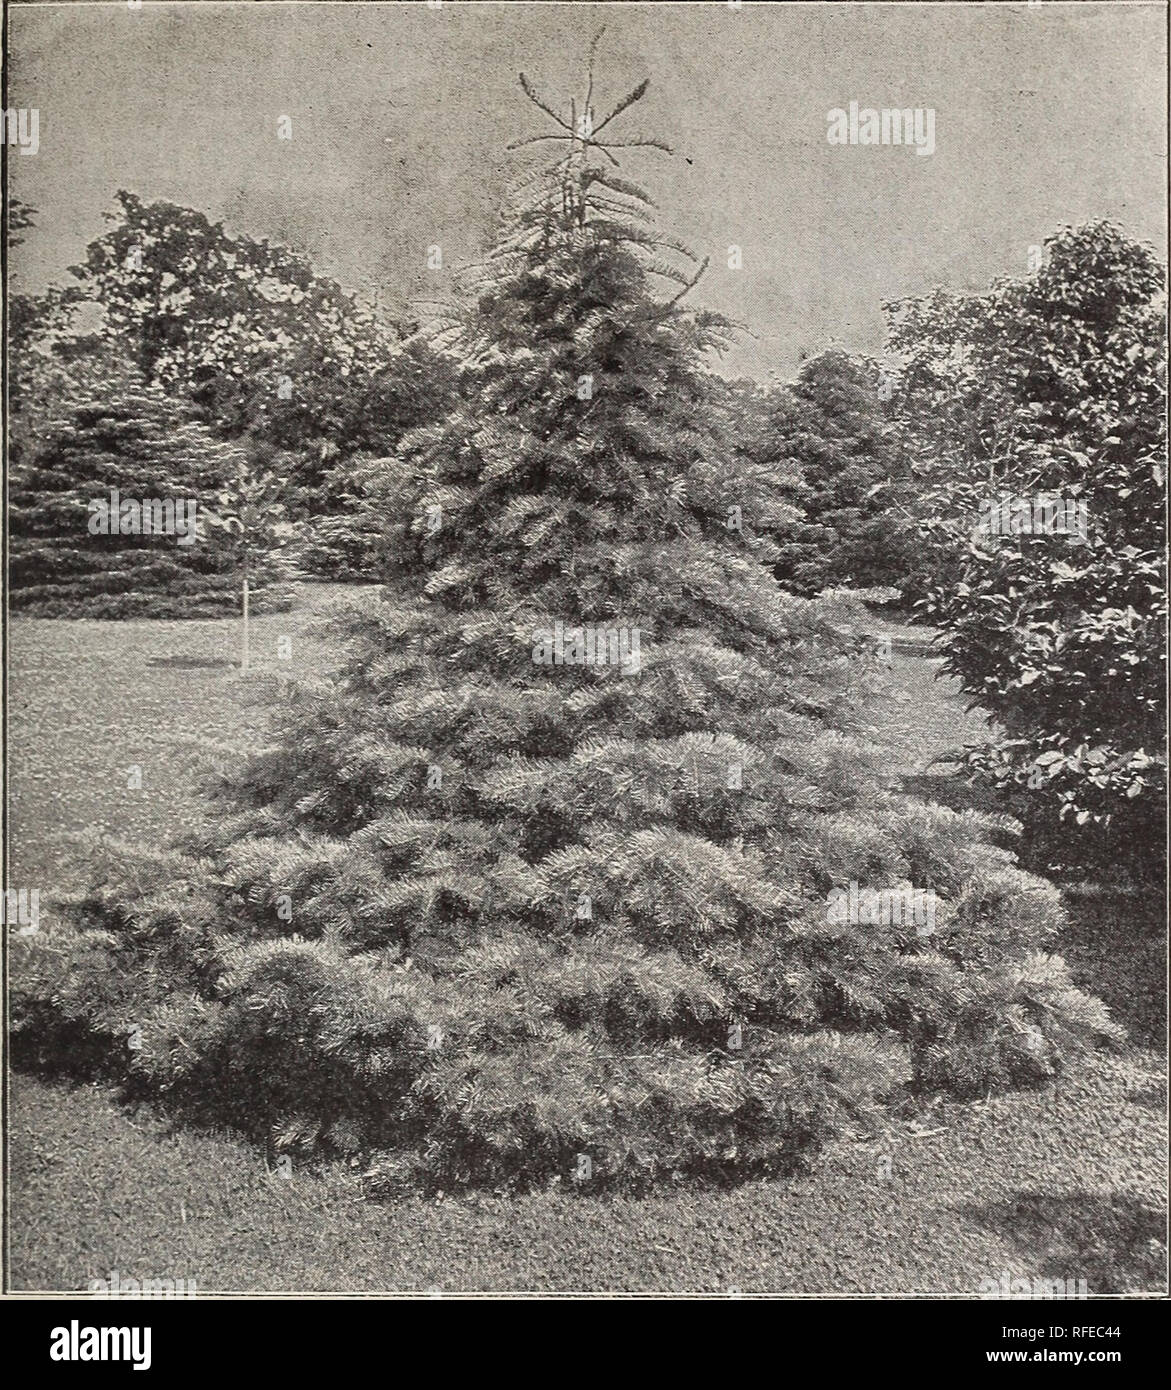 . Choice tree and hardy shrubs. Nursery stock New York (State) New York Catalogs; Trees Seedlings Catalogs; Plants, Ornamental Catalogs; Shrubs Catalogs; Flowers Catalogs; Fruit Catalogs. Choice Trees, Shrubs and Hardy Plants. 21. PlCEA CONCOLOE. CONCOLOR PICEA balsamea. Balm of Gilead Fir. Very hardy; foliage silvery underneath. 50 cts. to $1. PICEA Cephalonica. Cephalonian Fir. Sil- very dagger-shaped leaves. $1.50 to $2. PICEA concolor or lasiocarpa. Concolor Spruce. One of the hardiest and most beauti- ful Evergreens. Tree of graceful, stately habit. Large, broad, silvery green foliage. A  Stock Photo